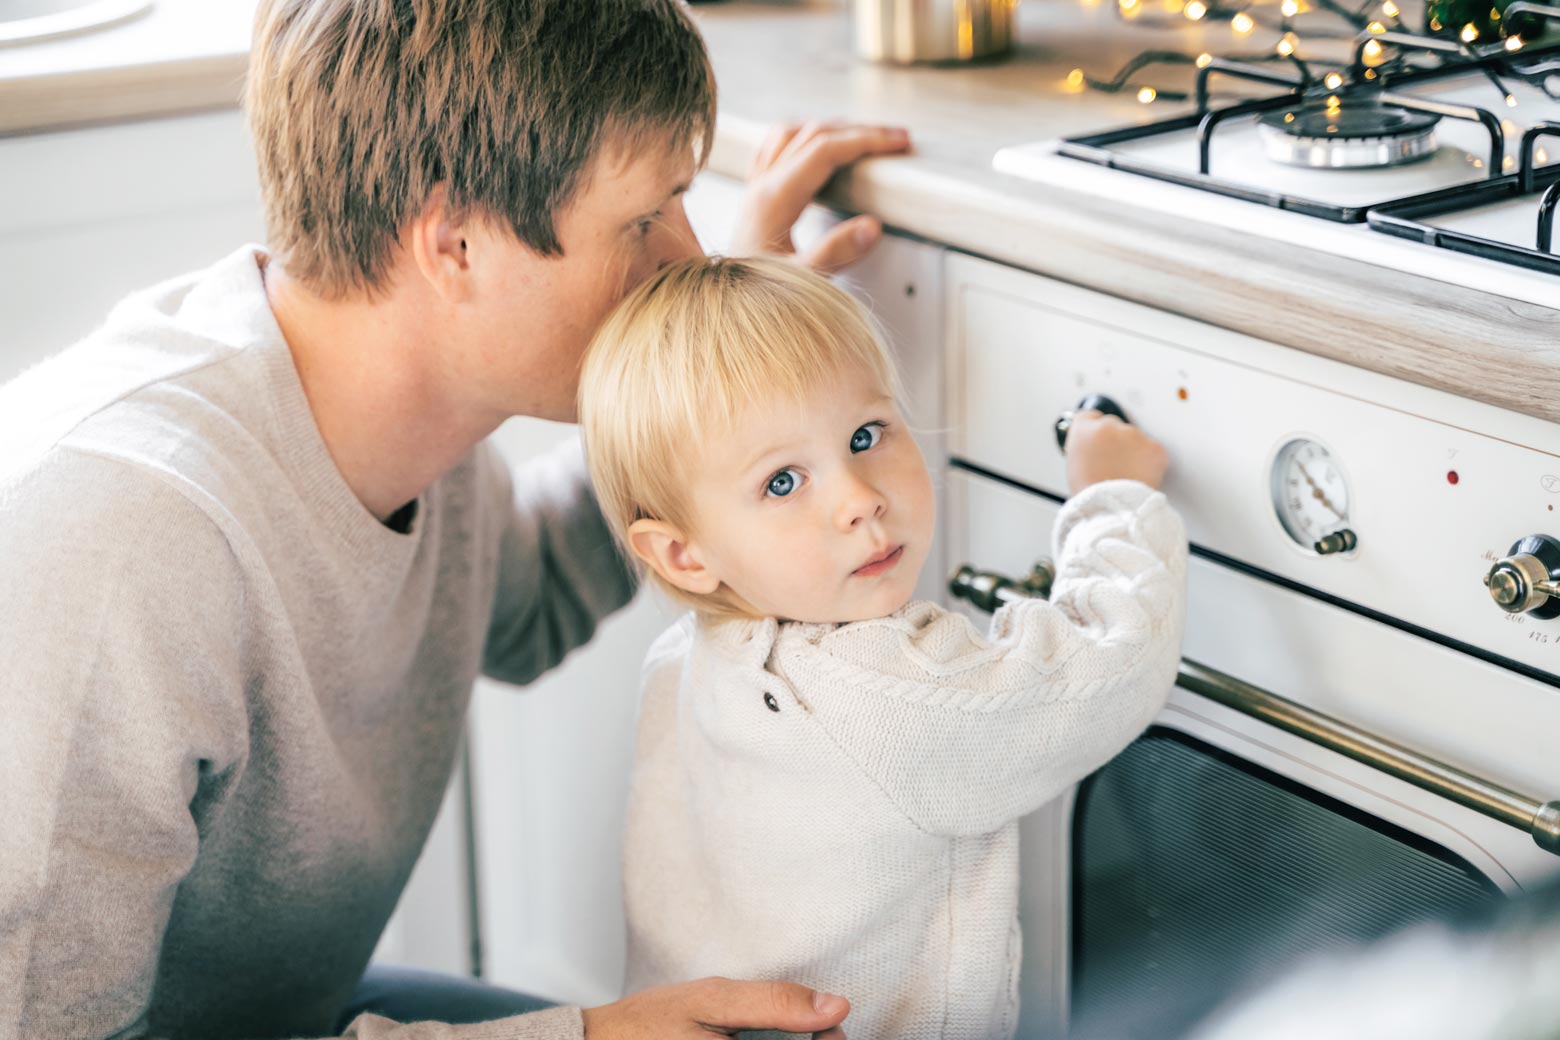 Gas stoves and cognitive development: What the research shows.